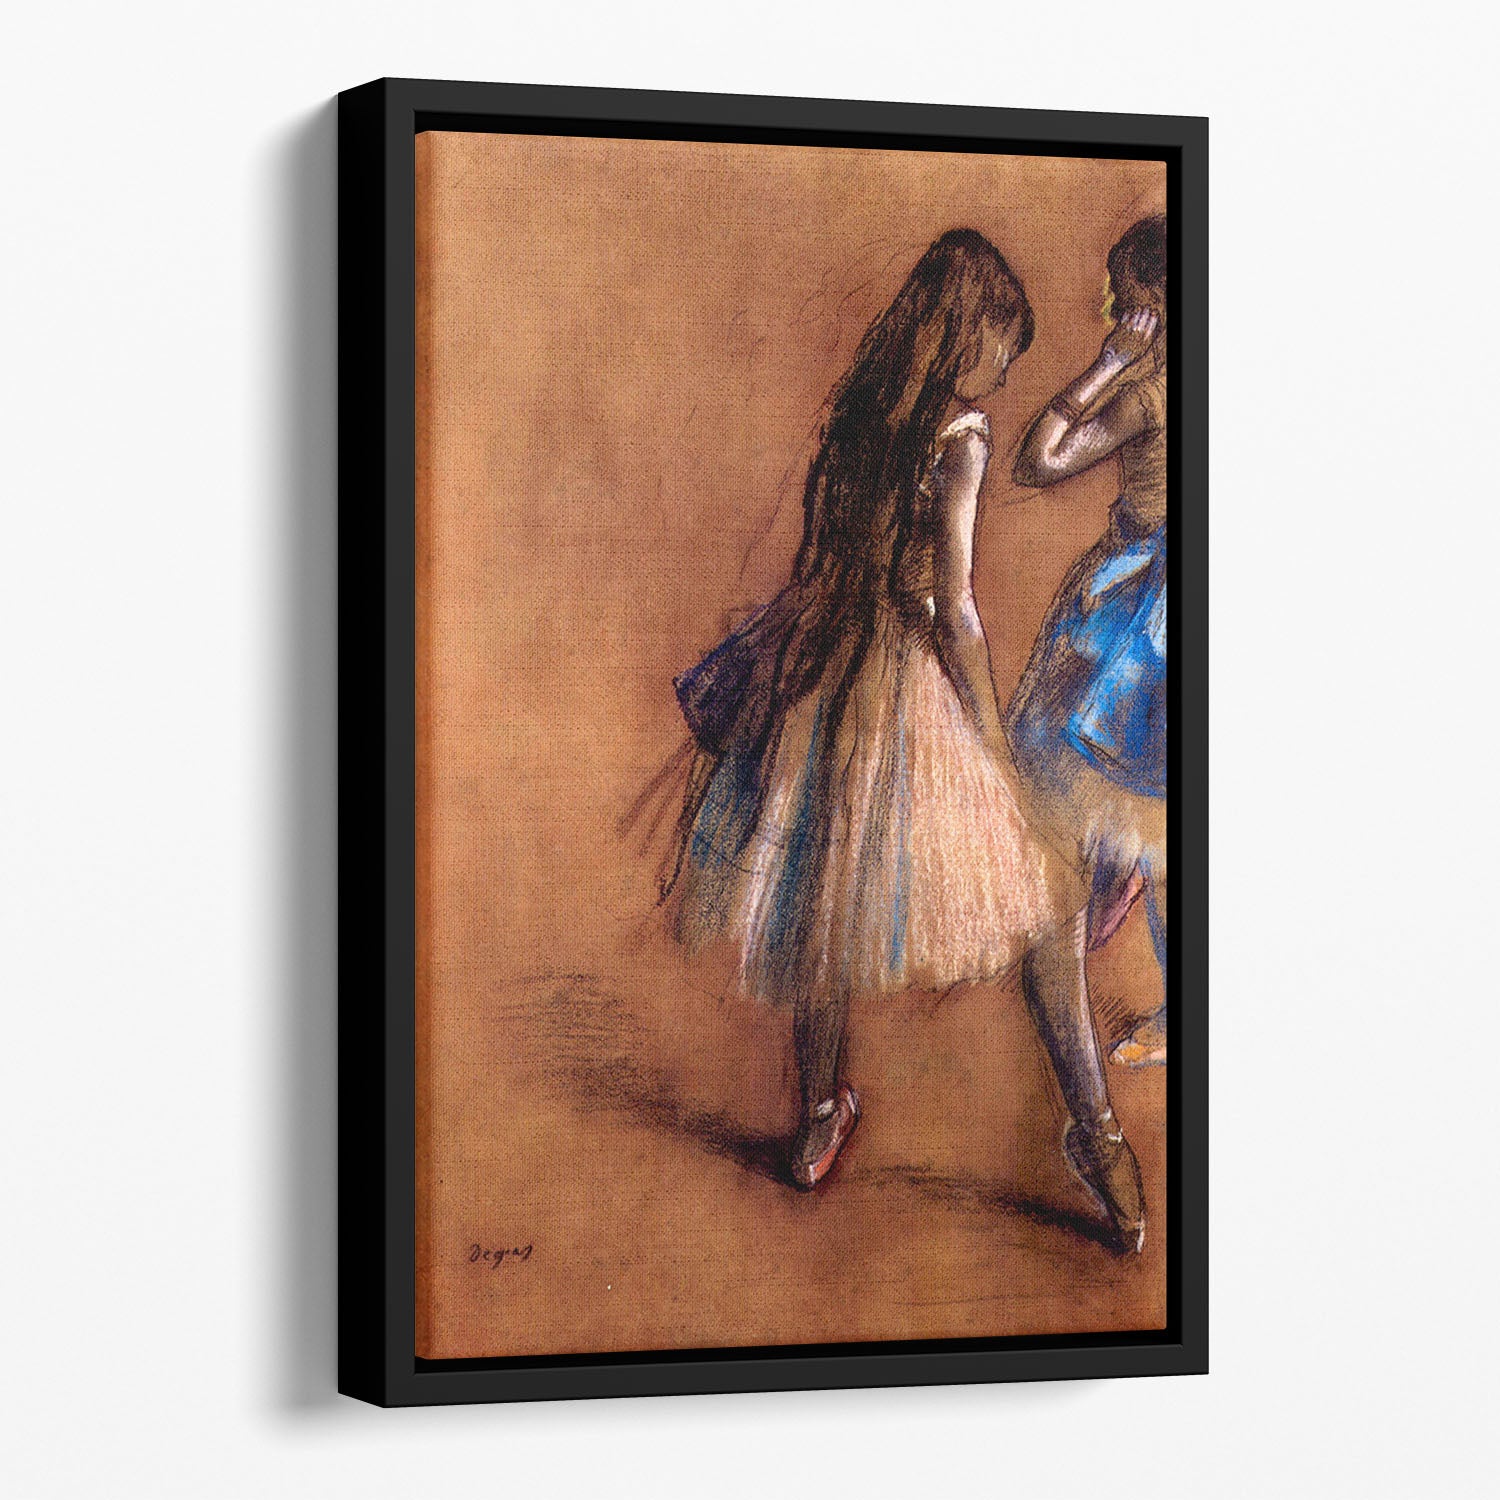 Two dancers 1 by Degas Floating Framed Canvas